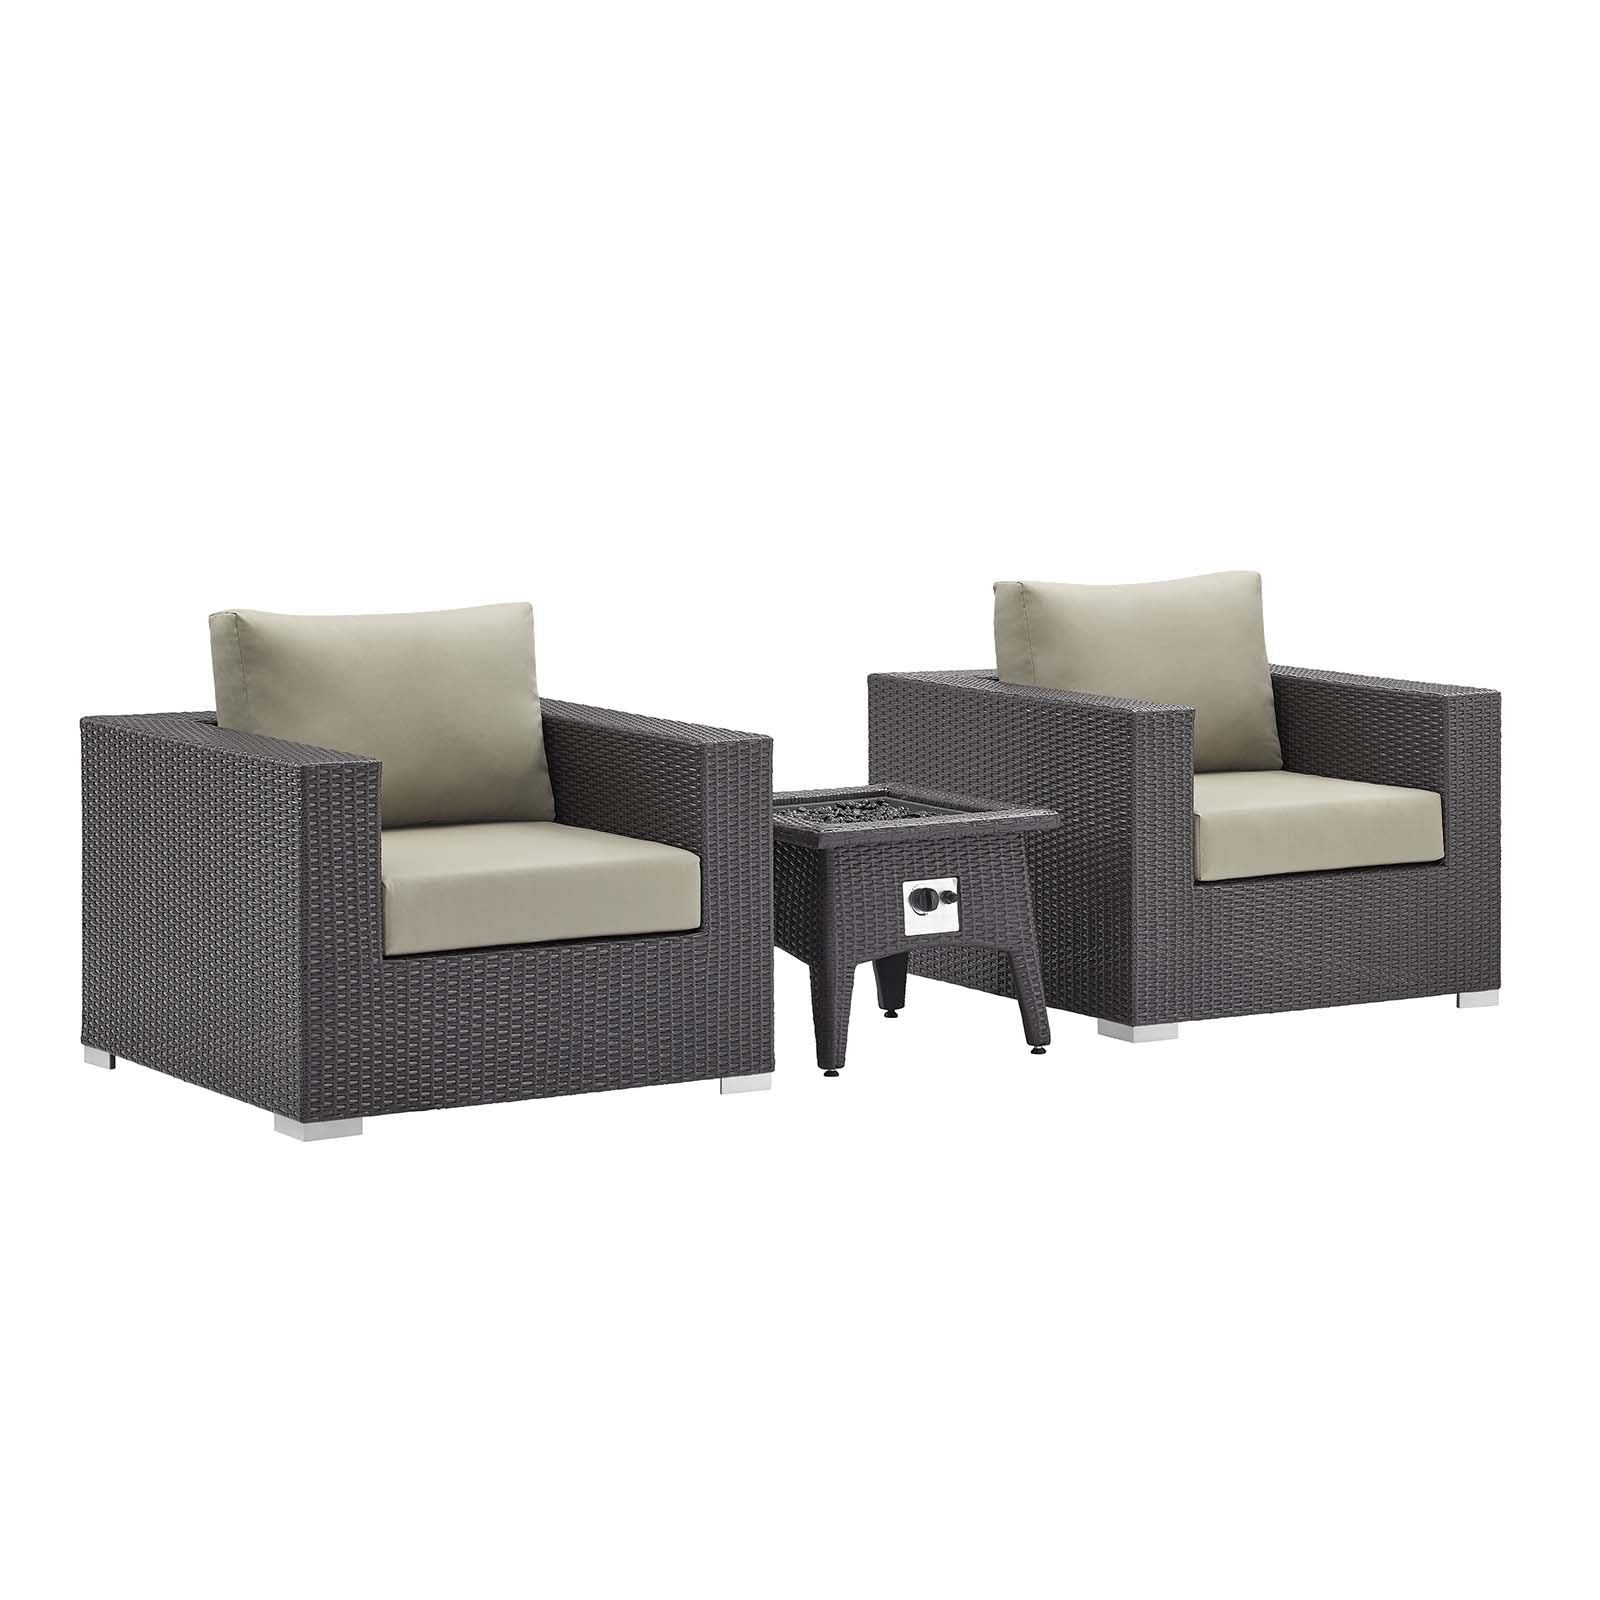 Modway Outdoor Conversation Sets - Convene 3 Piece Set 95"W Outdoor Patio with Fire Pit Espresso And Beige